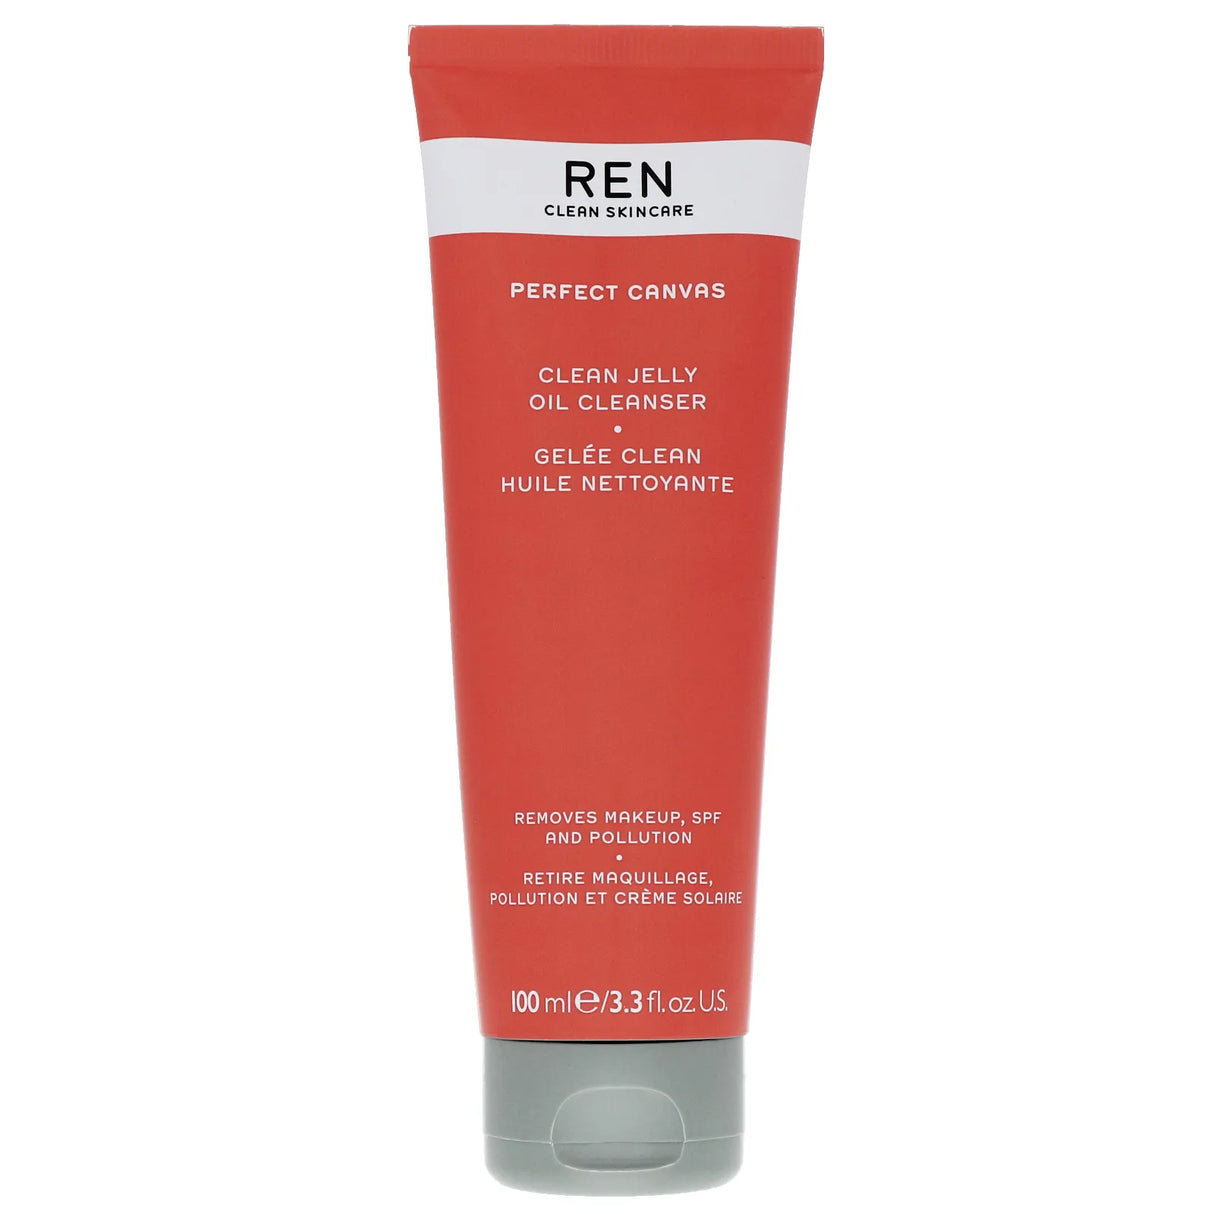 Ren Clean Skincare Perfect Canvas Clean Jelly Oil Cleanser (100ml)